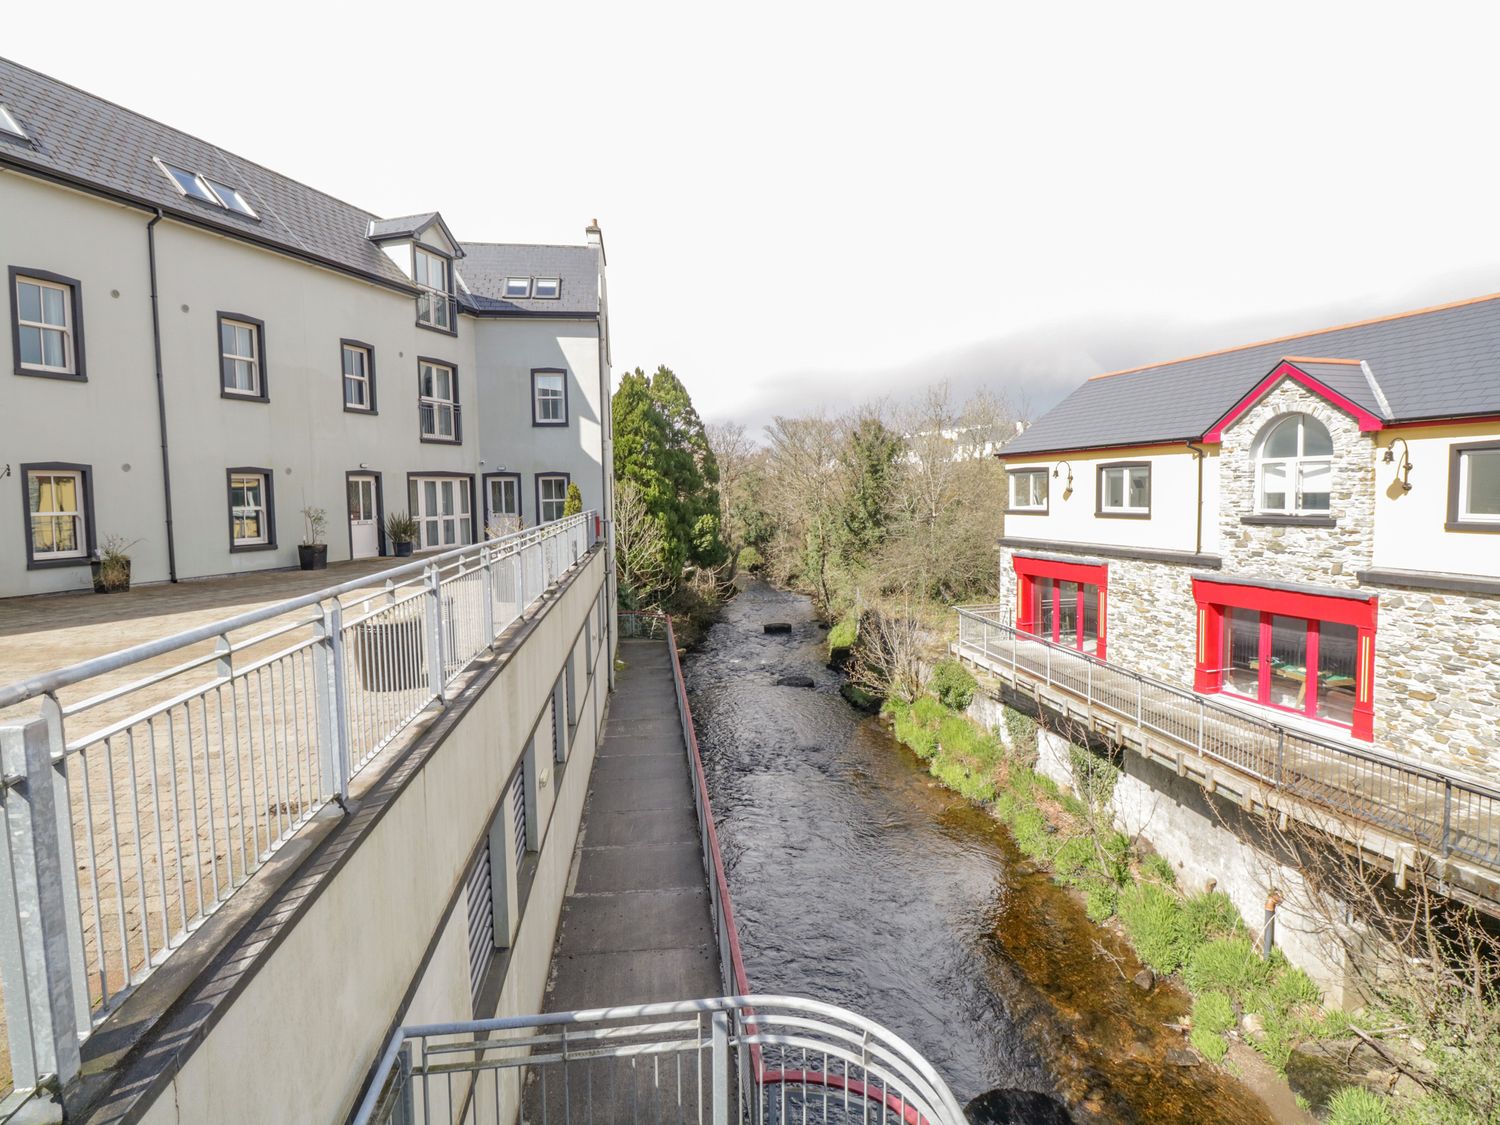 Central Ardara Riverside Apartment - County Donegal - 939487 - photo 1